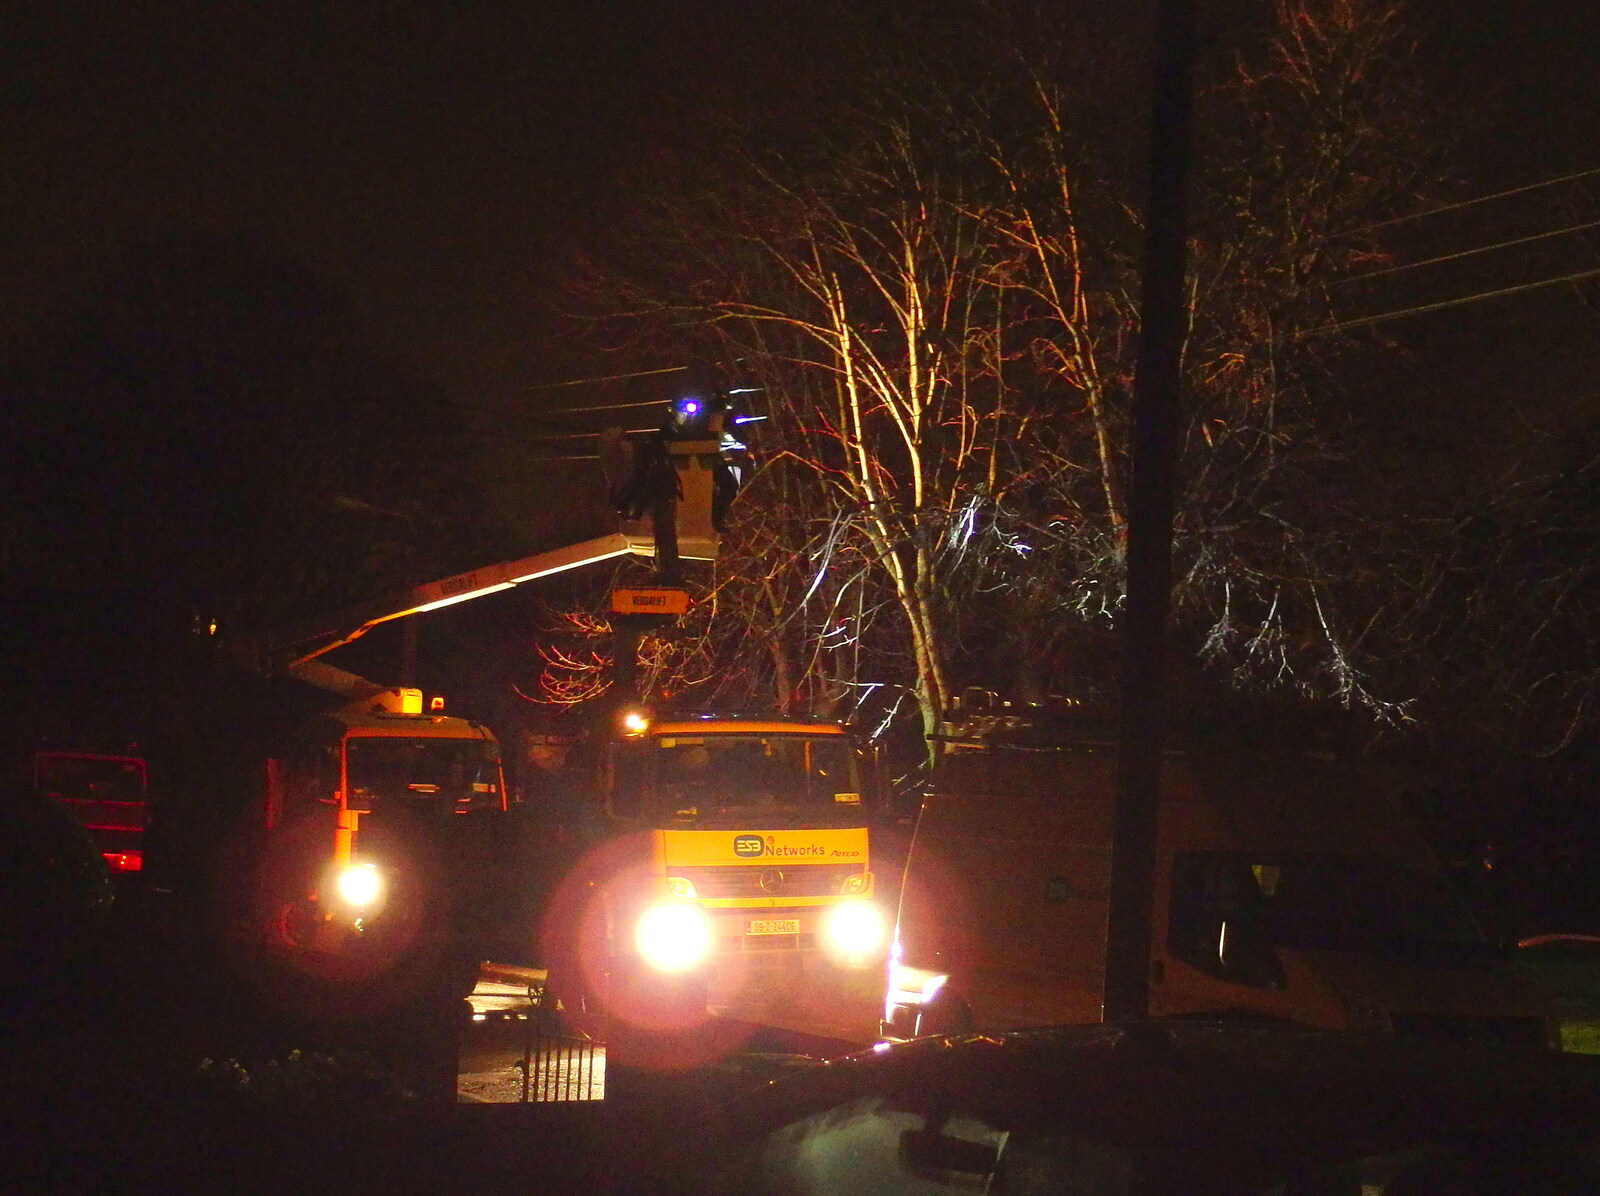 A cherry-picker arrives to cut down the branch from Dun Laoghaire and an Electrical Disaster, Monkstown, County Dublin, Ireland - 4th January 2014